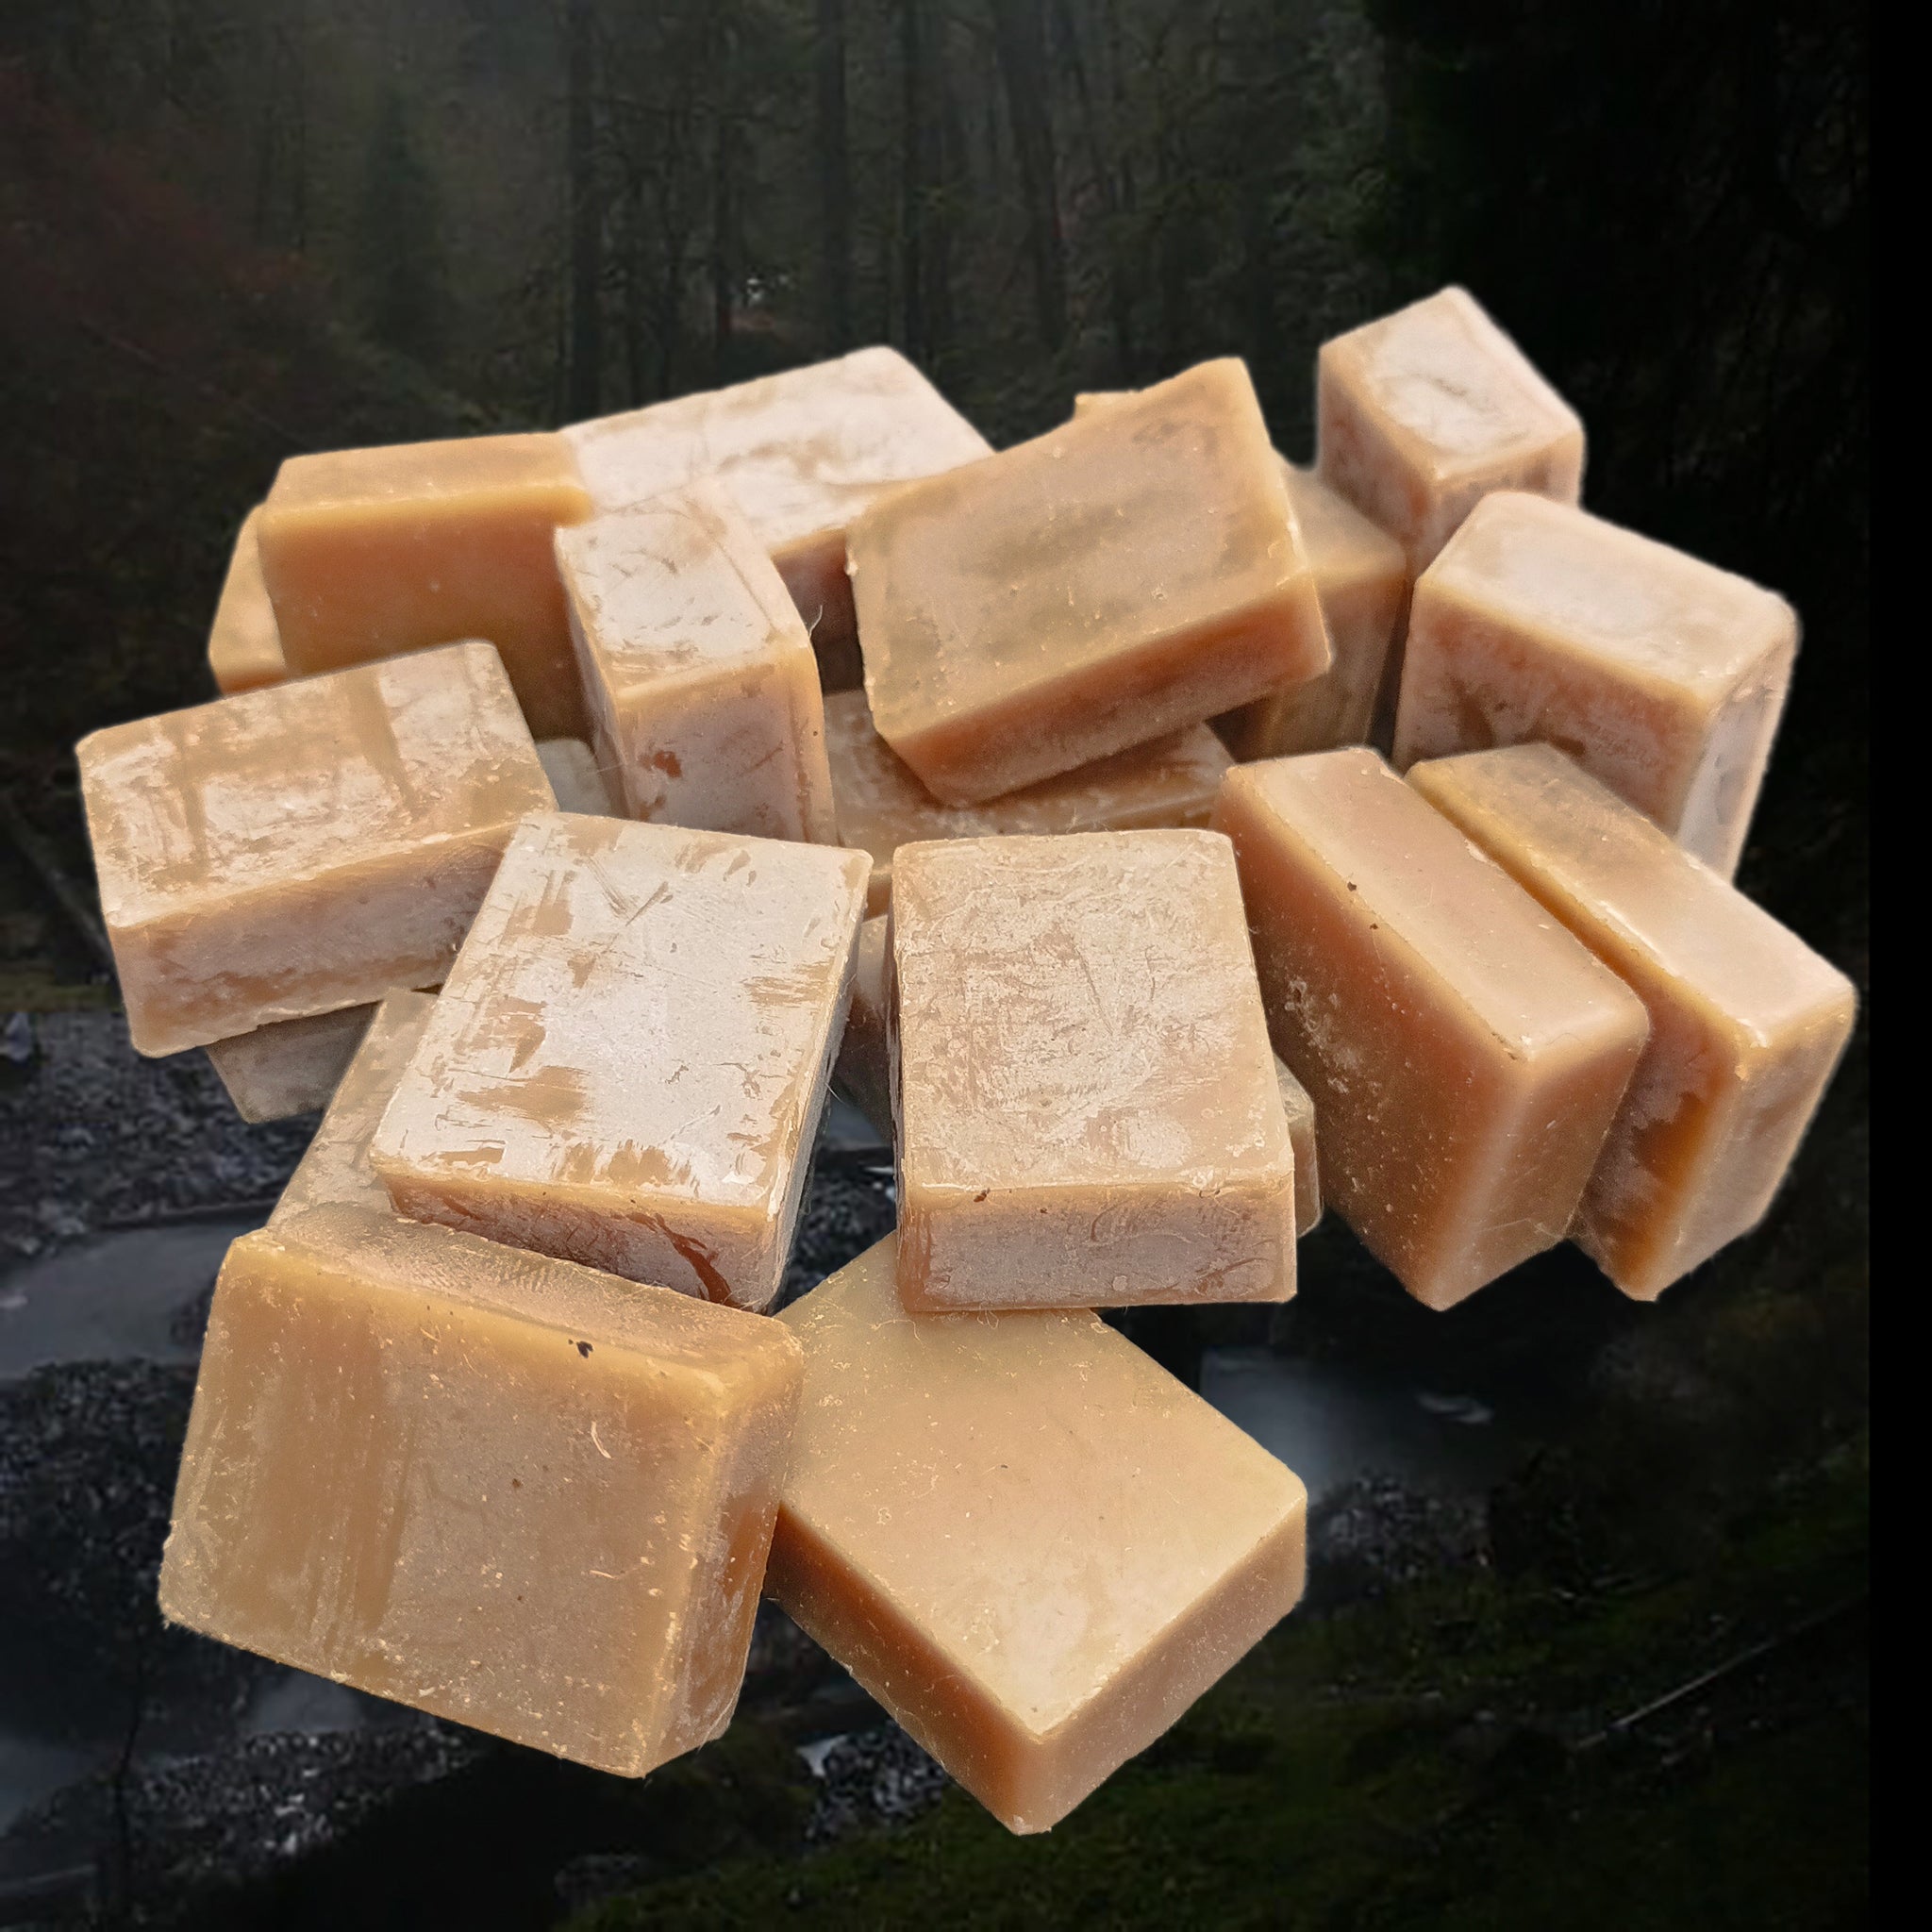 100% Natural Beeswax Cakes / Blocks for Viking Leather Craft